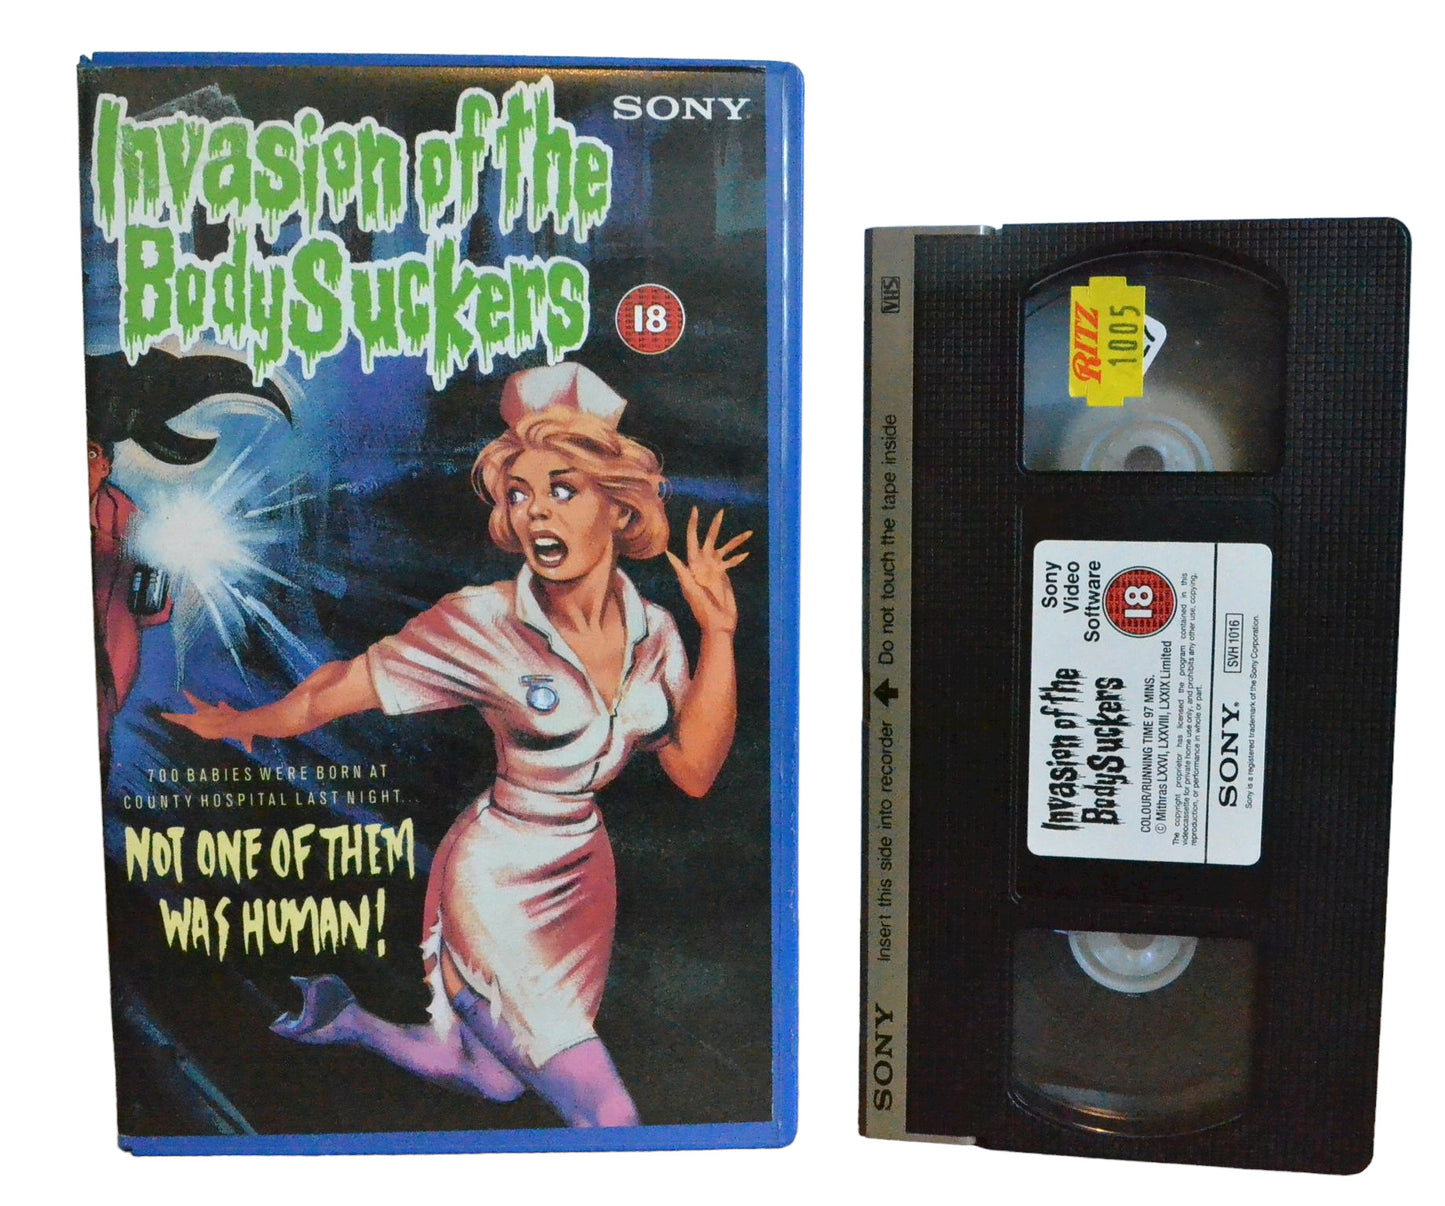 Invasion Of The Body Suckers -  Steve Railsback - Sony Video Software - Large Box - PAL - VHS-